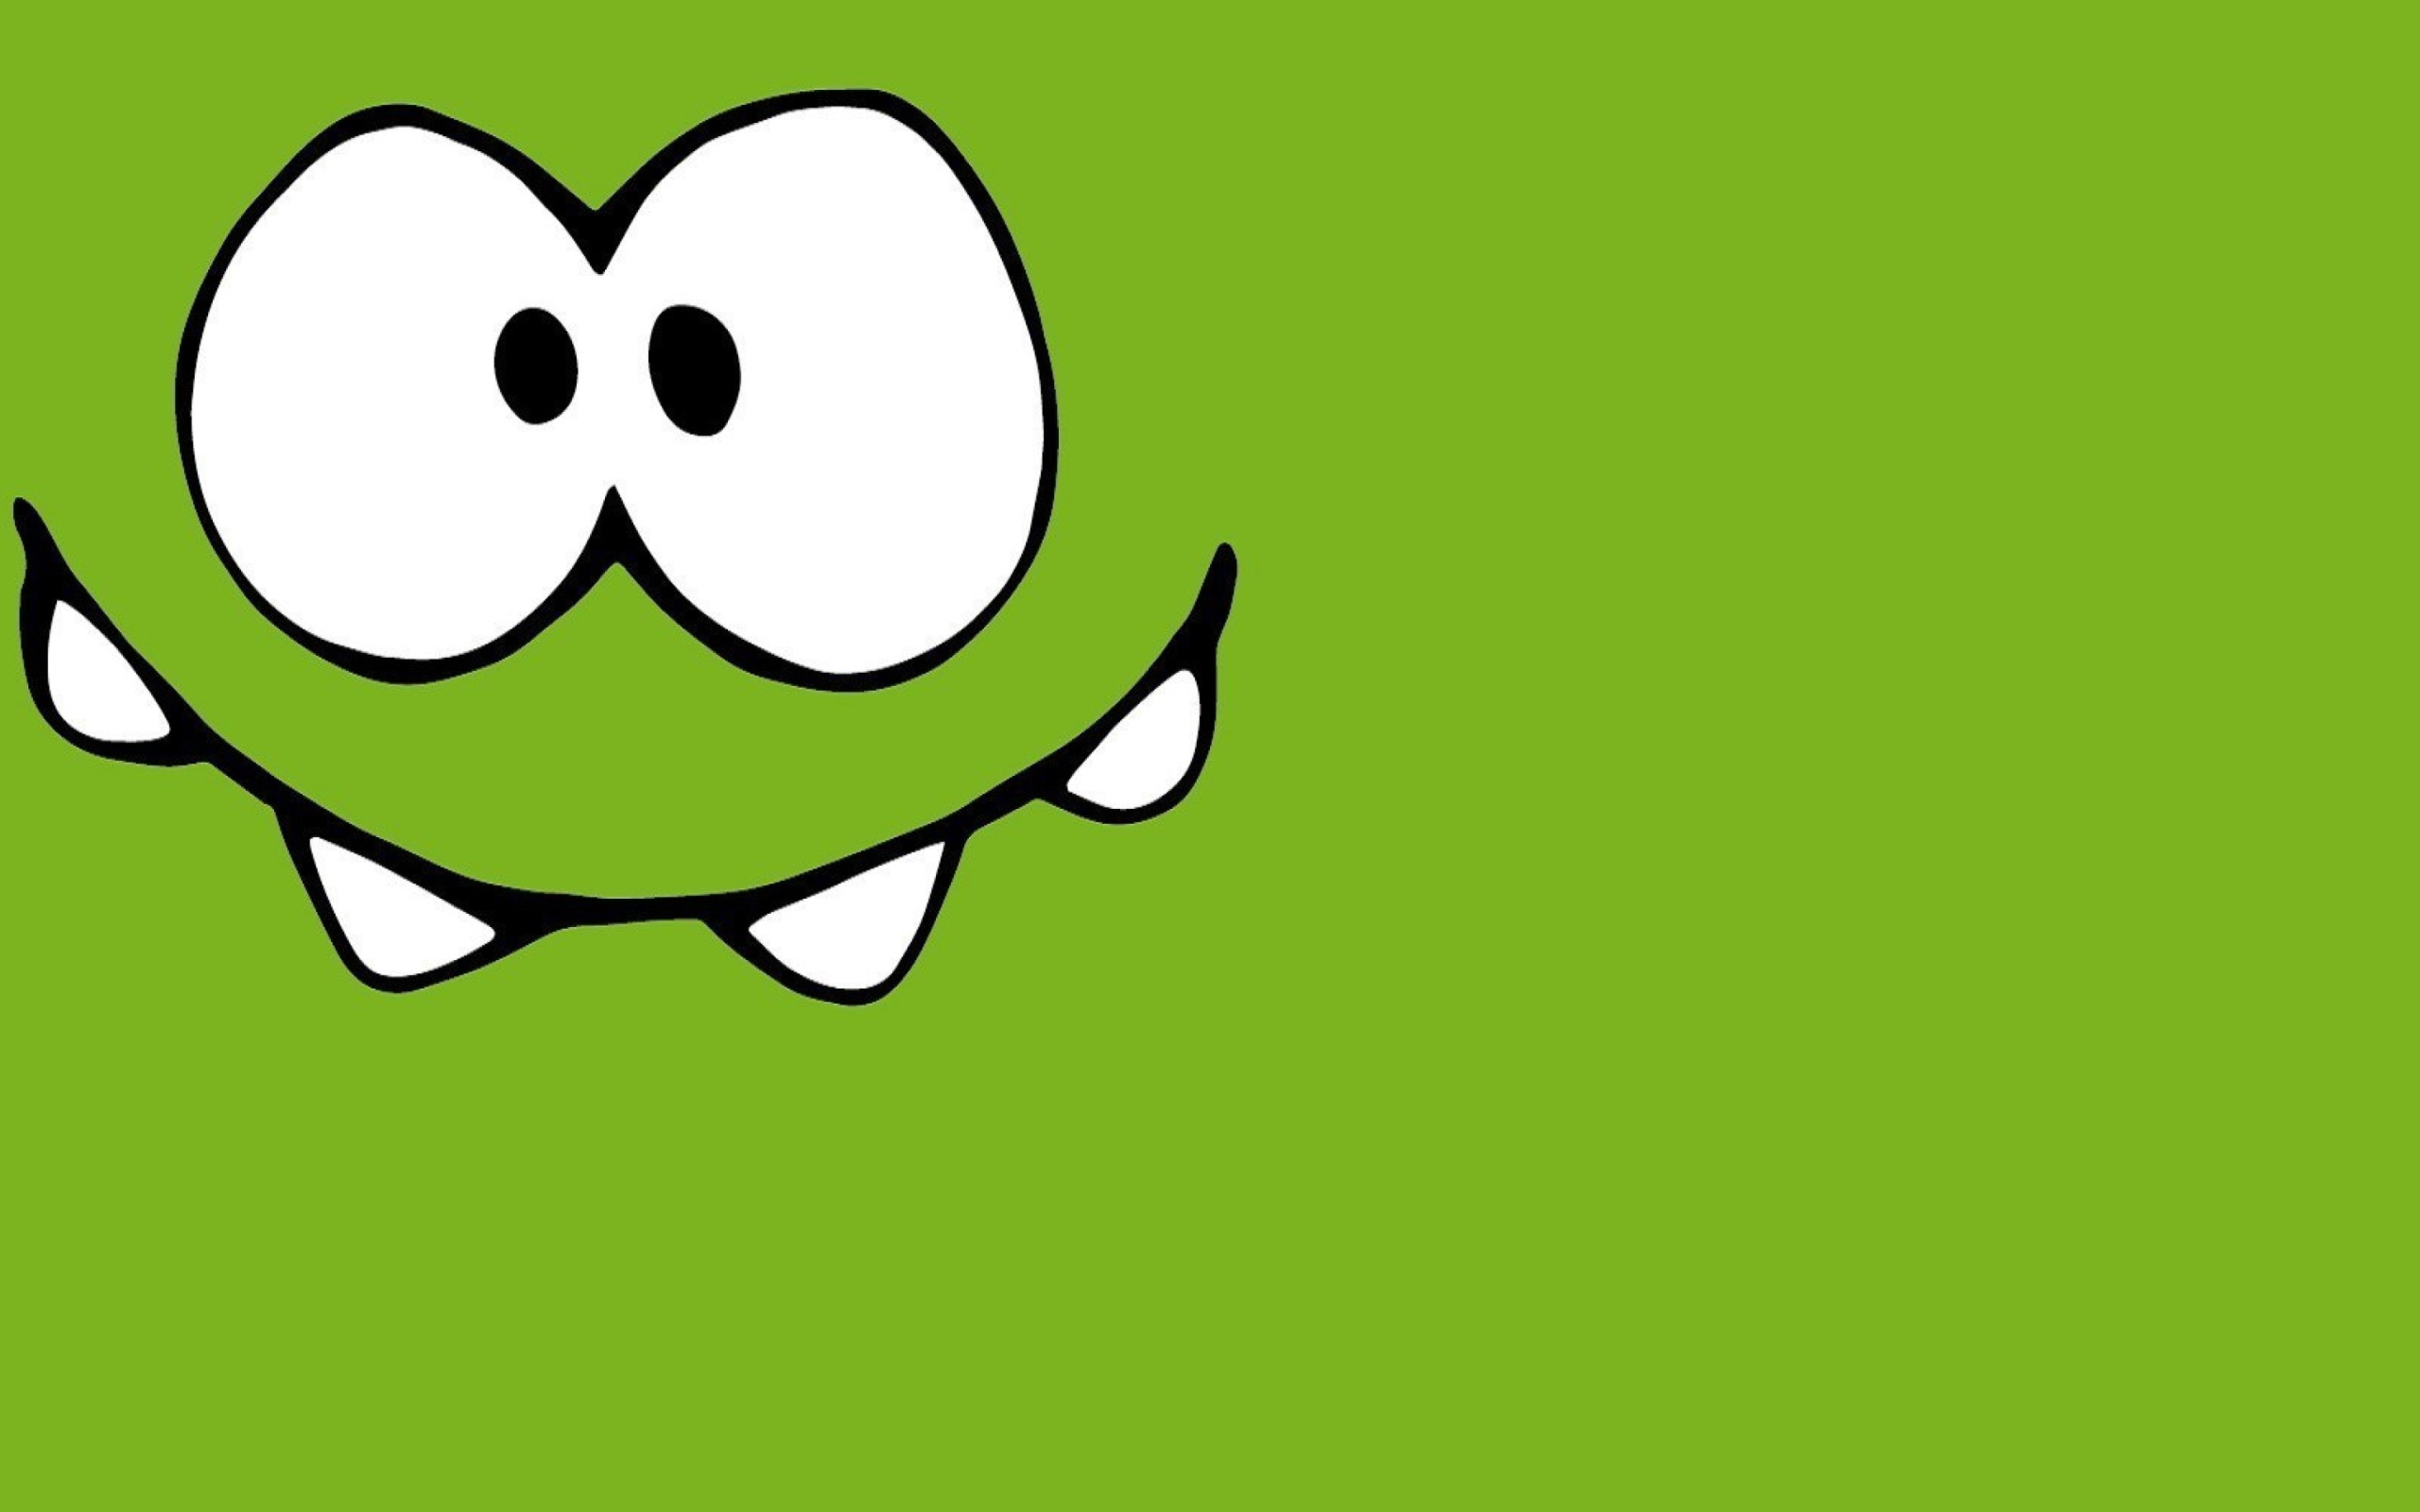 Om Nom from game Cut the Rope screenshot #1 2560x1600